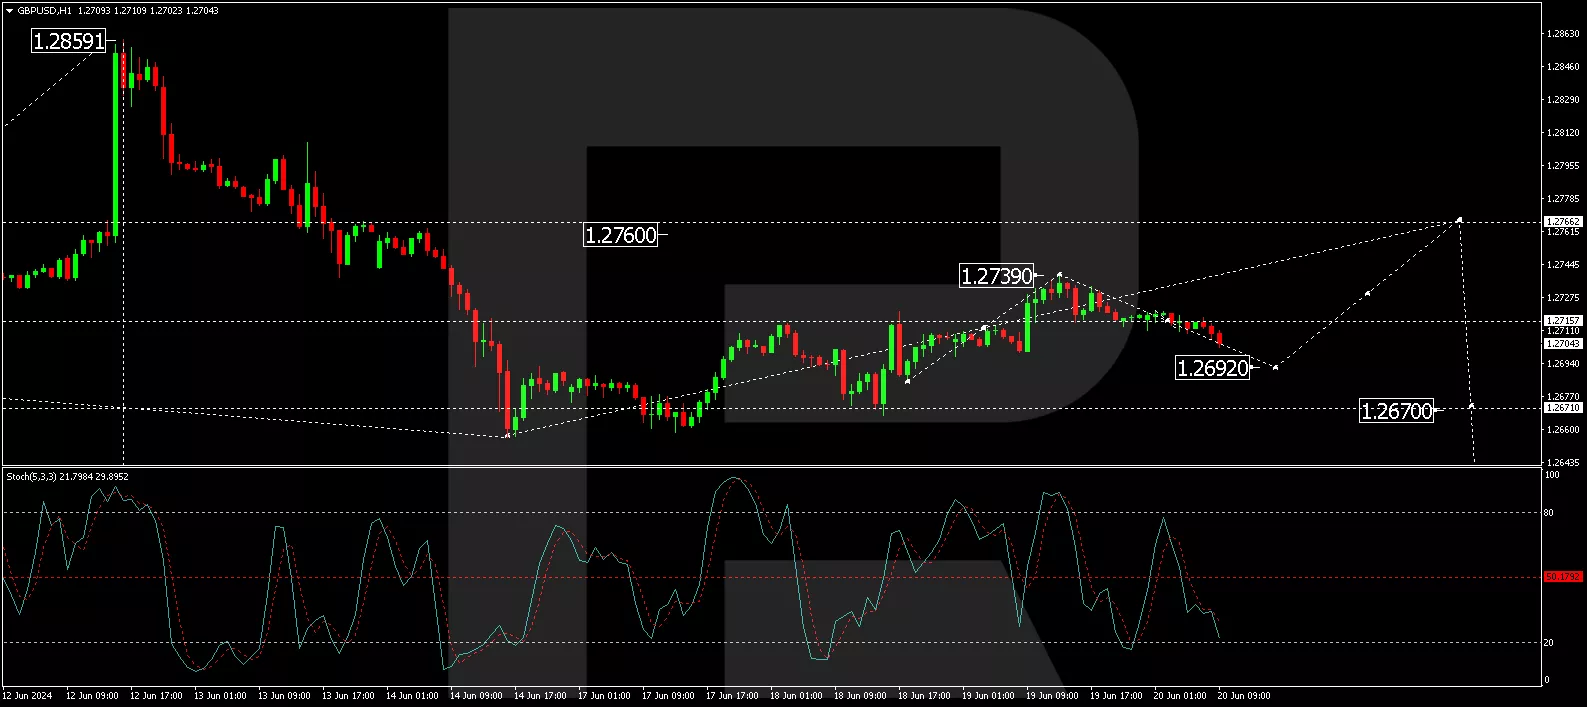 Technical analysis of GBP/USD